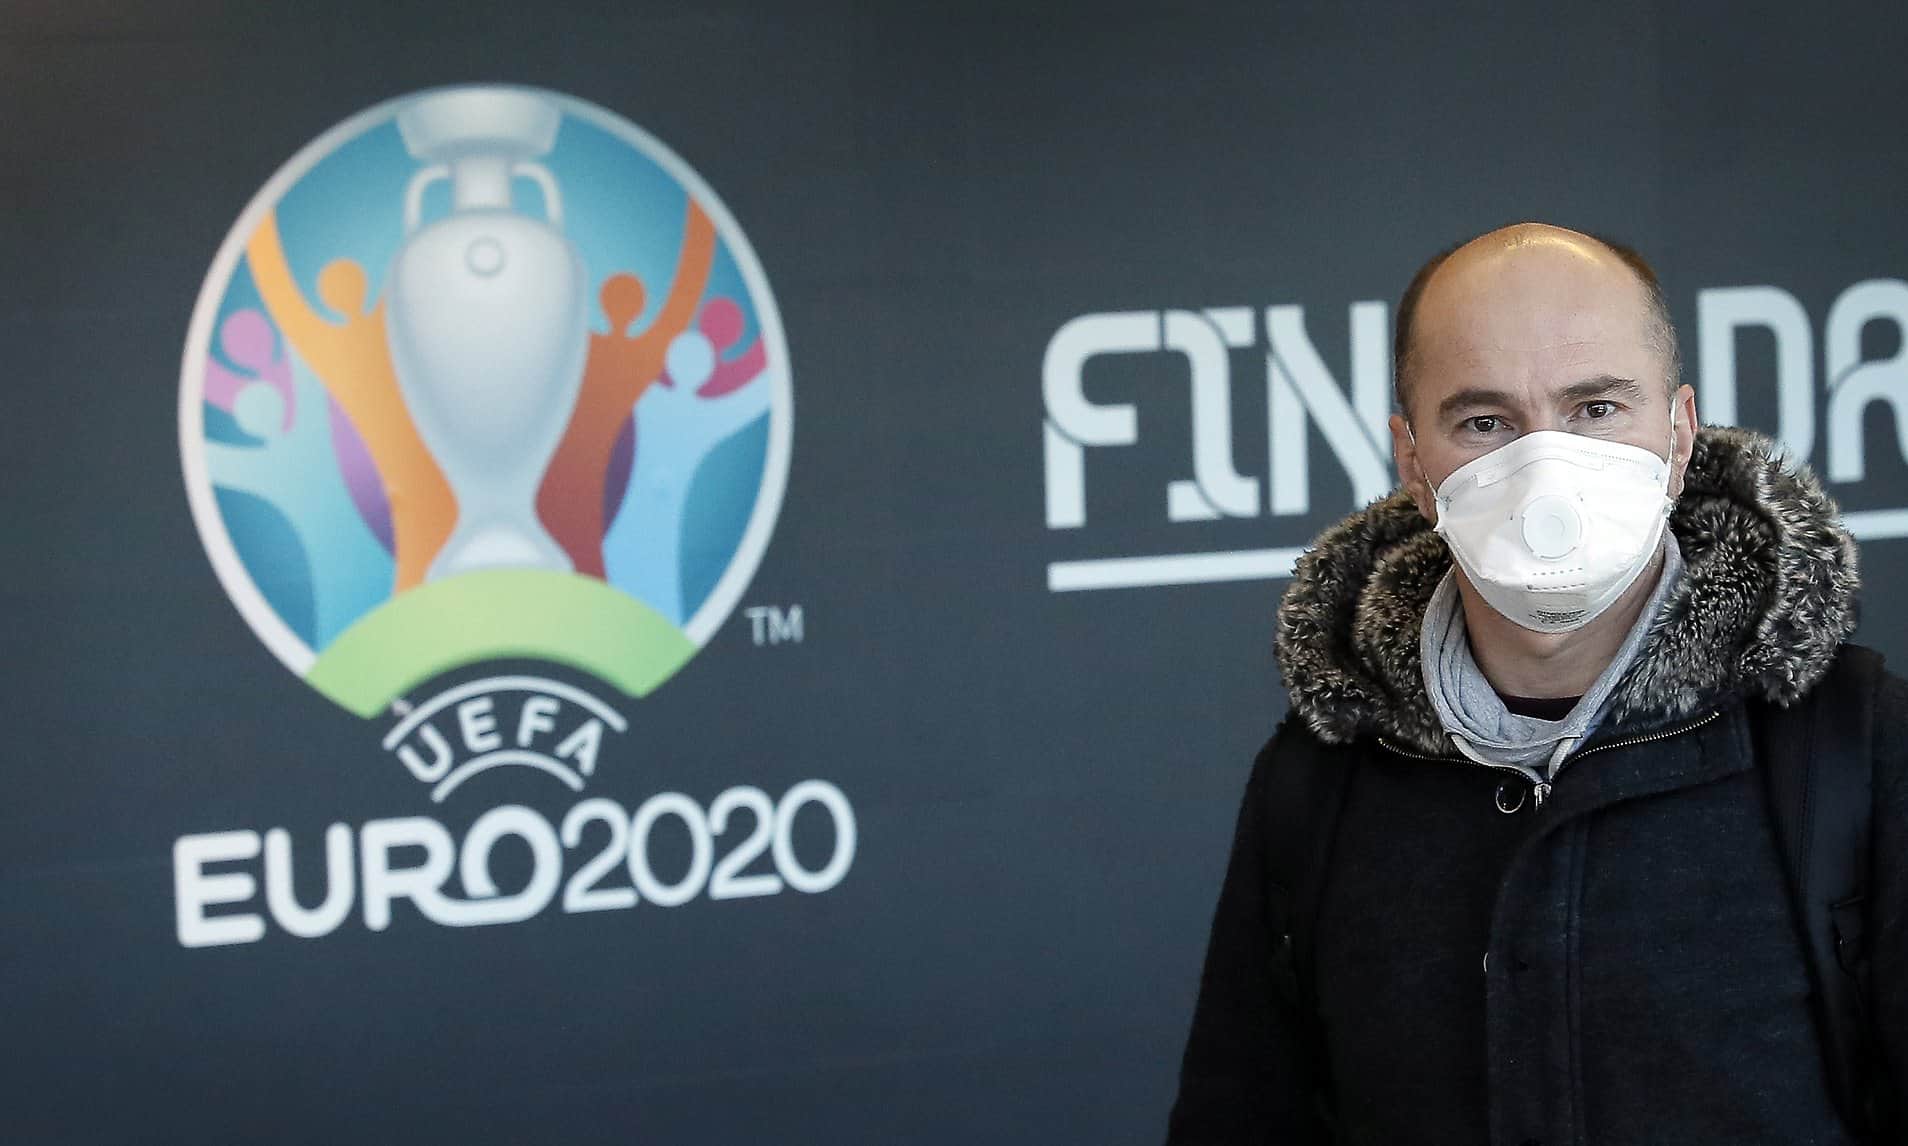 COVID-19 mask on a face of a fan near the logo of canceled EURO 2020.